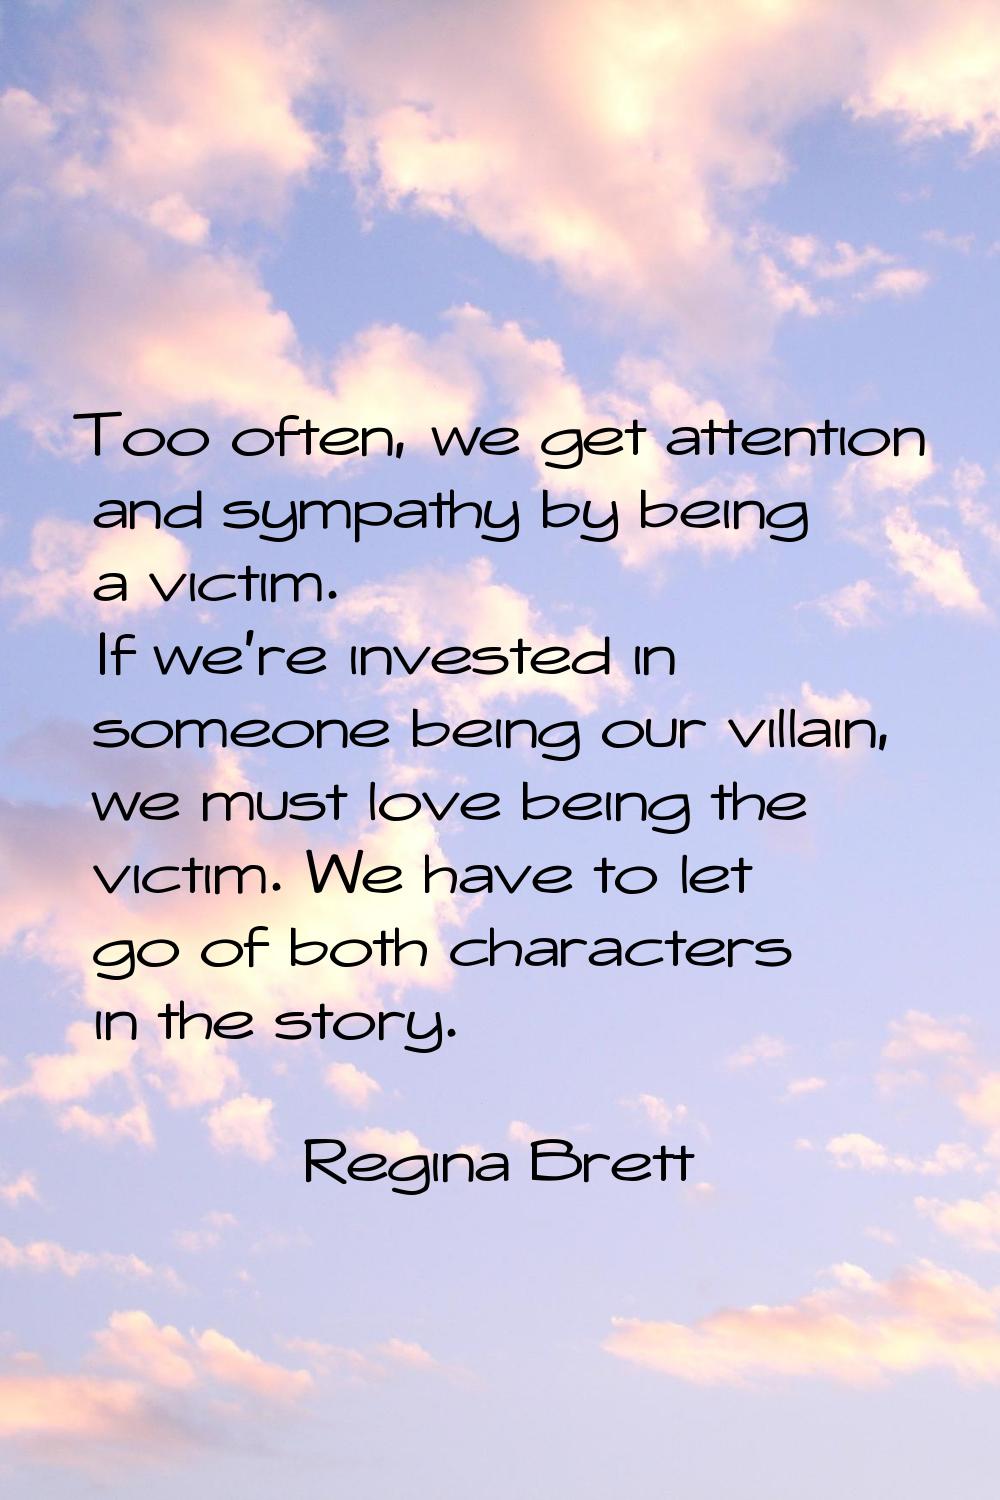 Too often, we get attention and sympathy by being a victim. If we're invested in someone being our 